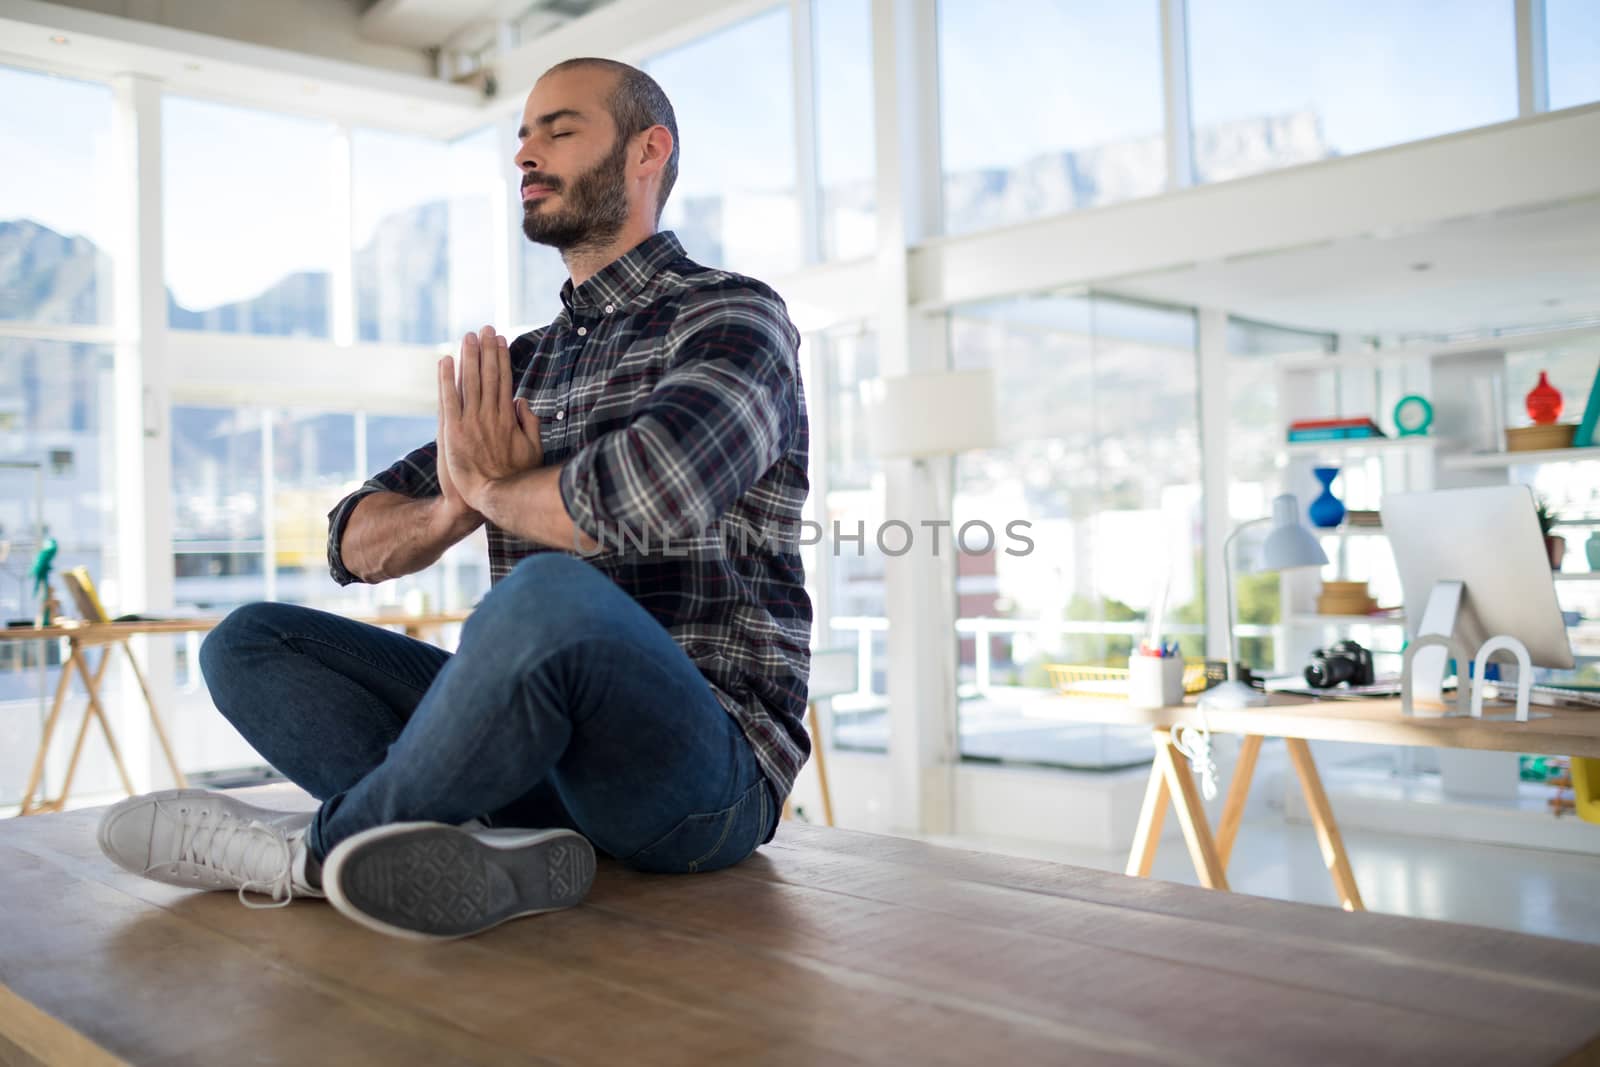 Male executive performing yoga on a table in the office